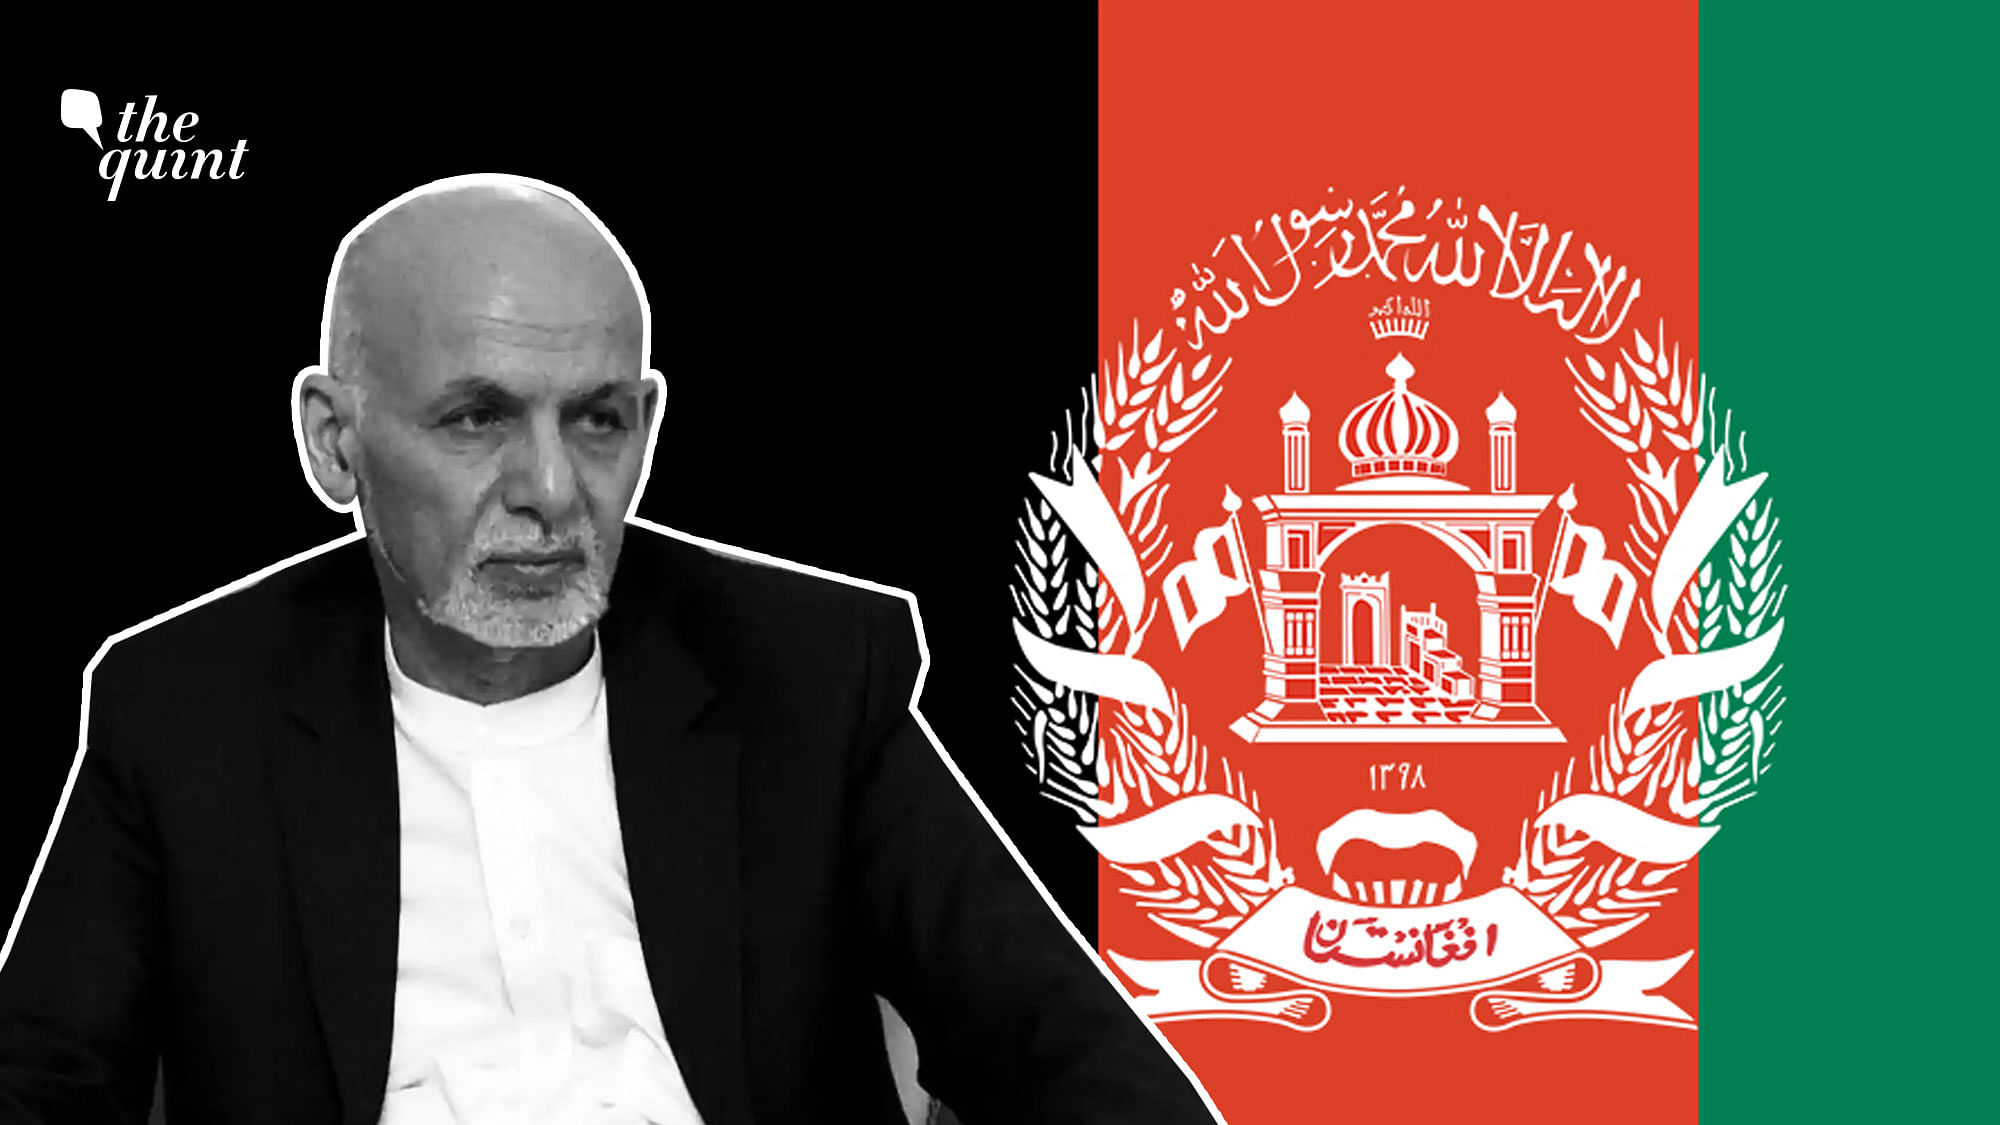 <div class="paragraphs"><p>Former Afghan President Ashraf Ghani, who is presently being <a href="https://www.thequint.com/news/world/humanitarian-grounds-uae-welcomes-afghan-prez-ghani-post-taliban-take-over#read-more">sheltered by UAE</a> on 'humanitarian grounds', on Wednesday, 18 August, said in a video message that he had no intention of remaining in exile, and that he was in talks to return to Afghanistan.</p></div>